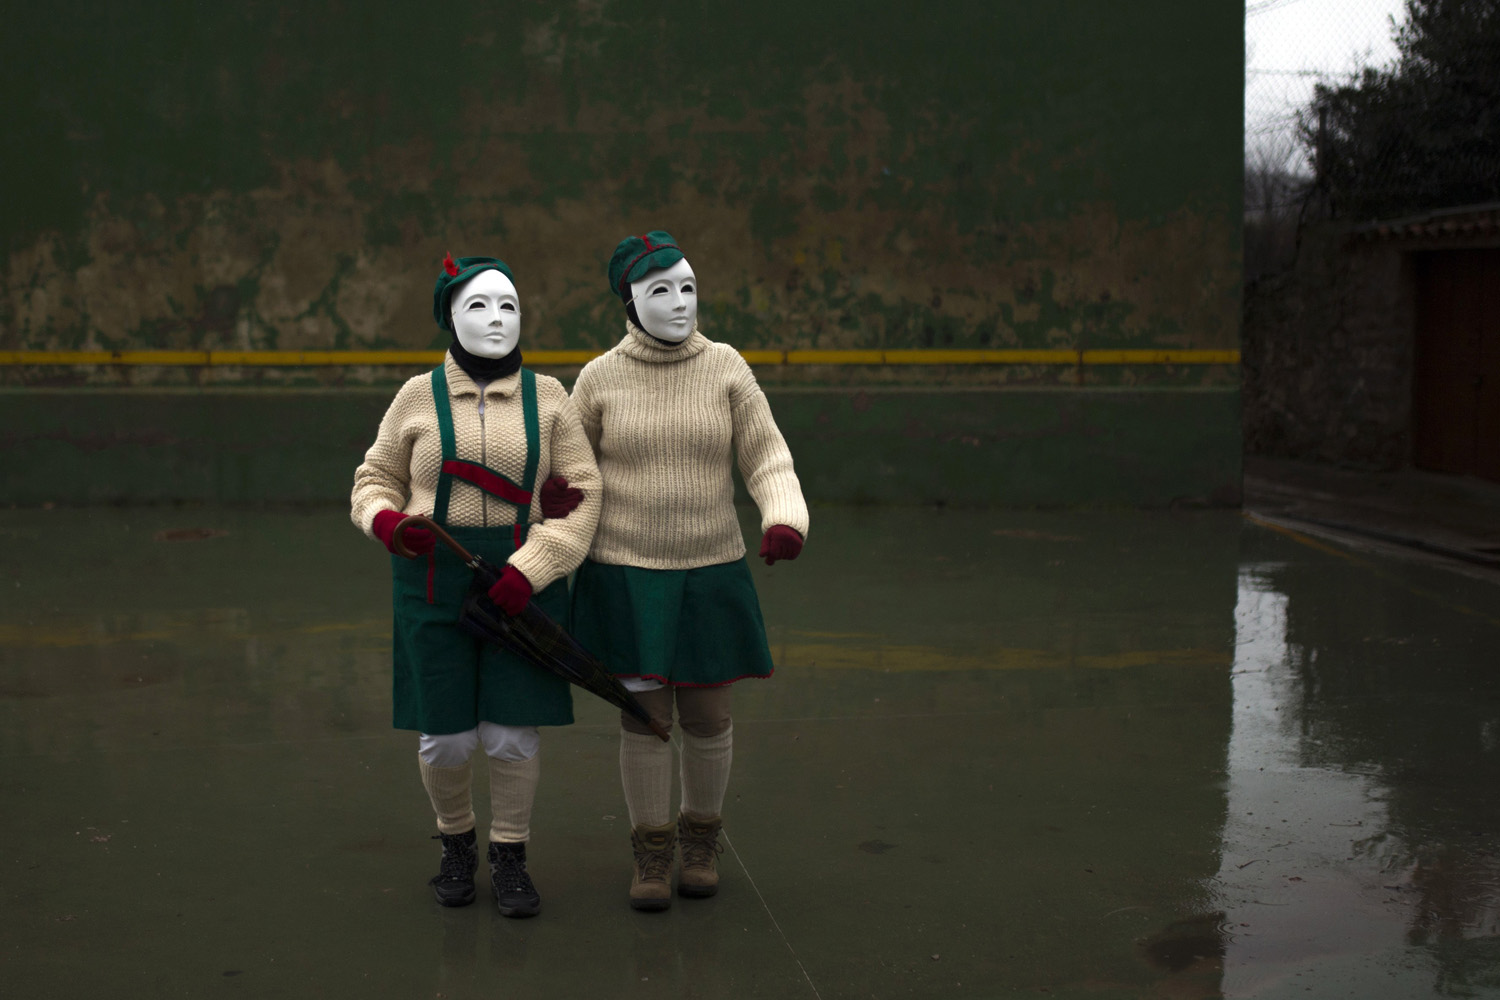 Mar. 1, 2014. People wearing masks walk around a square to participate in a traditional carnival celebration in the small village of Luzon Spain.